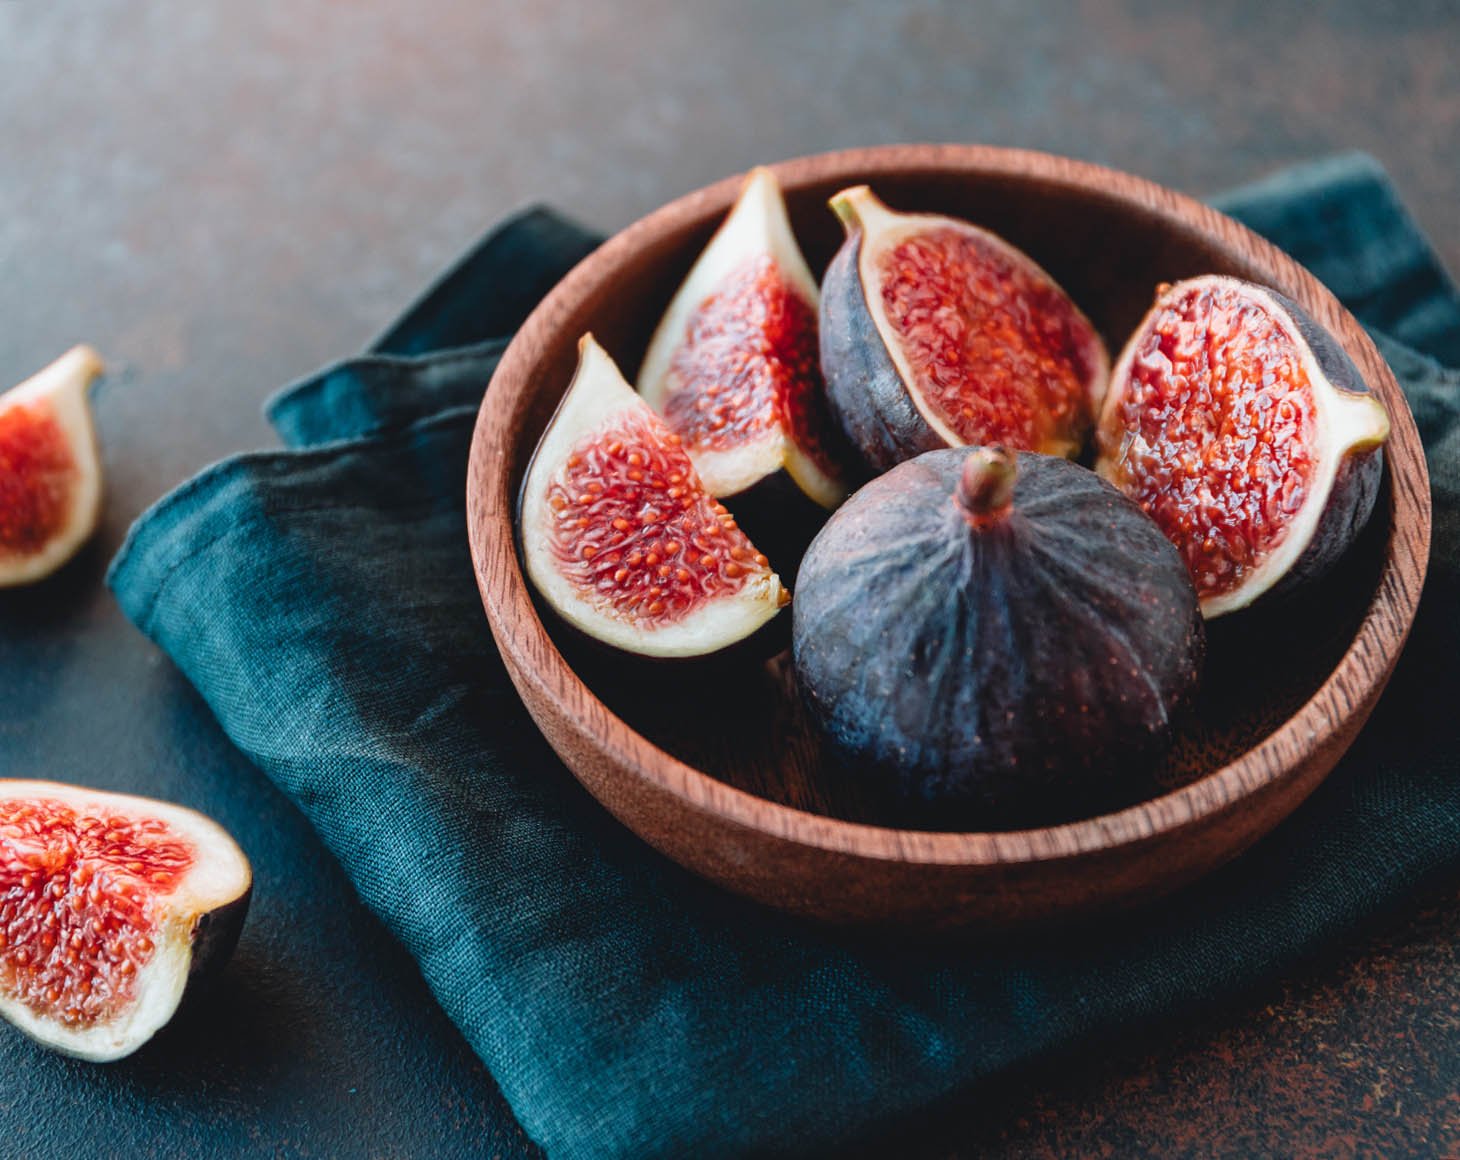 Macro photo of ripe figs in a wooden small bowl on a table.